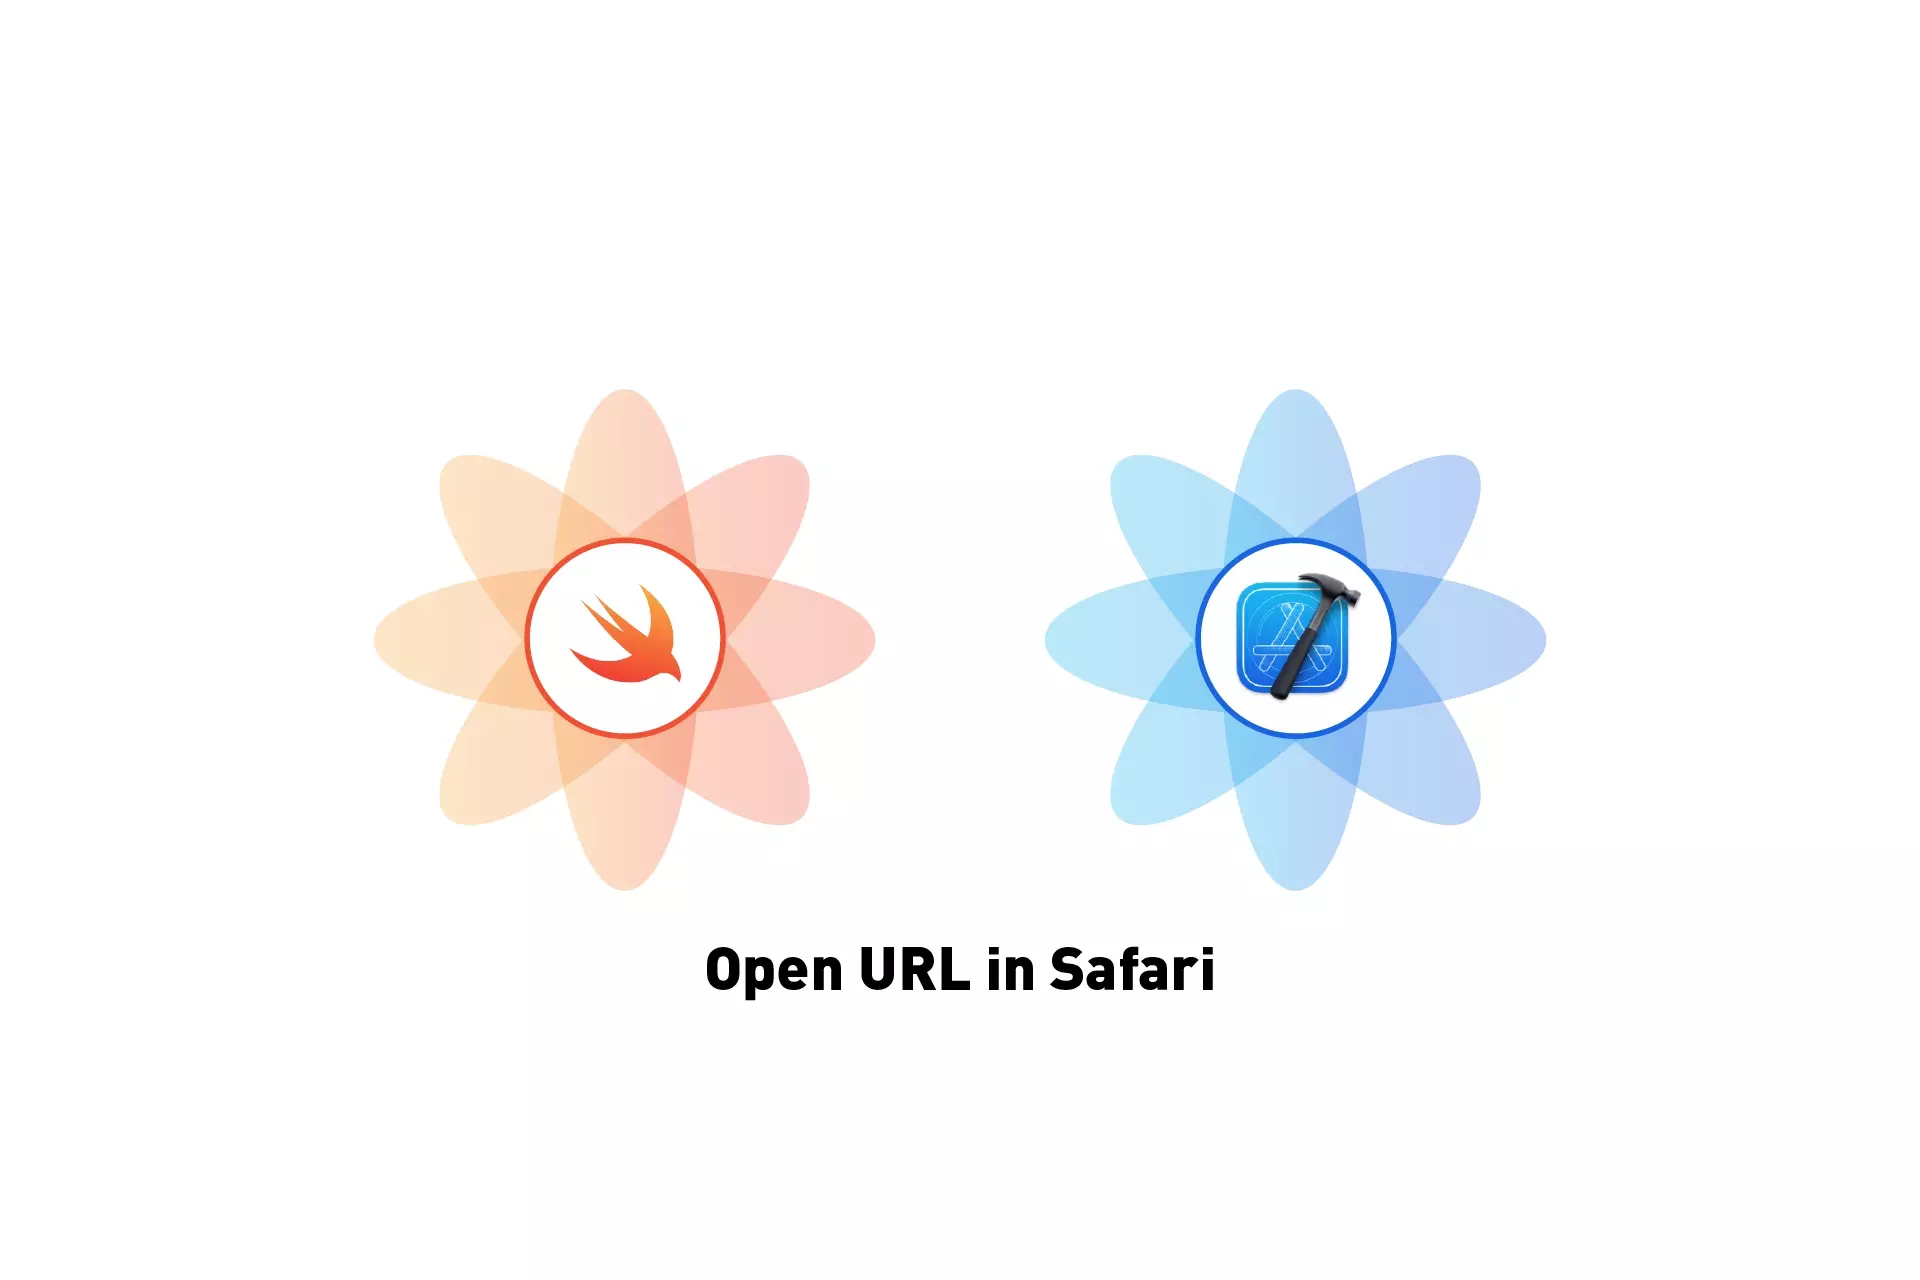 Two flowers that represent Swift and XCode side by side. Beneath them sits the text "Open URL in Safari."